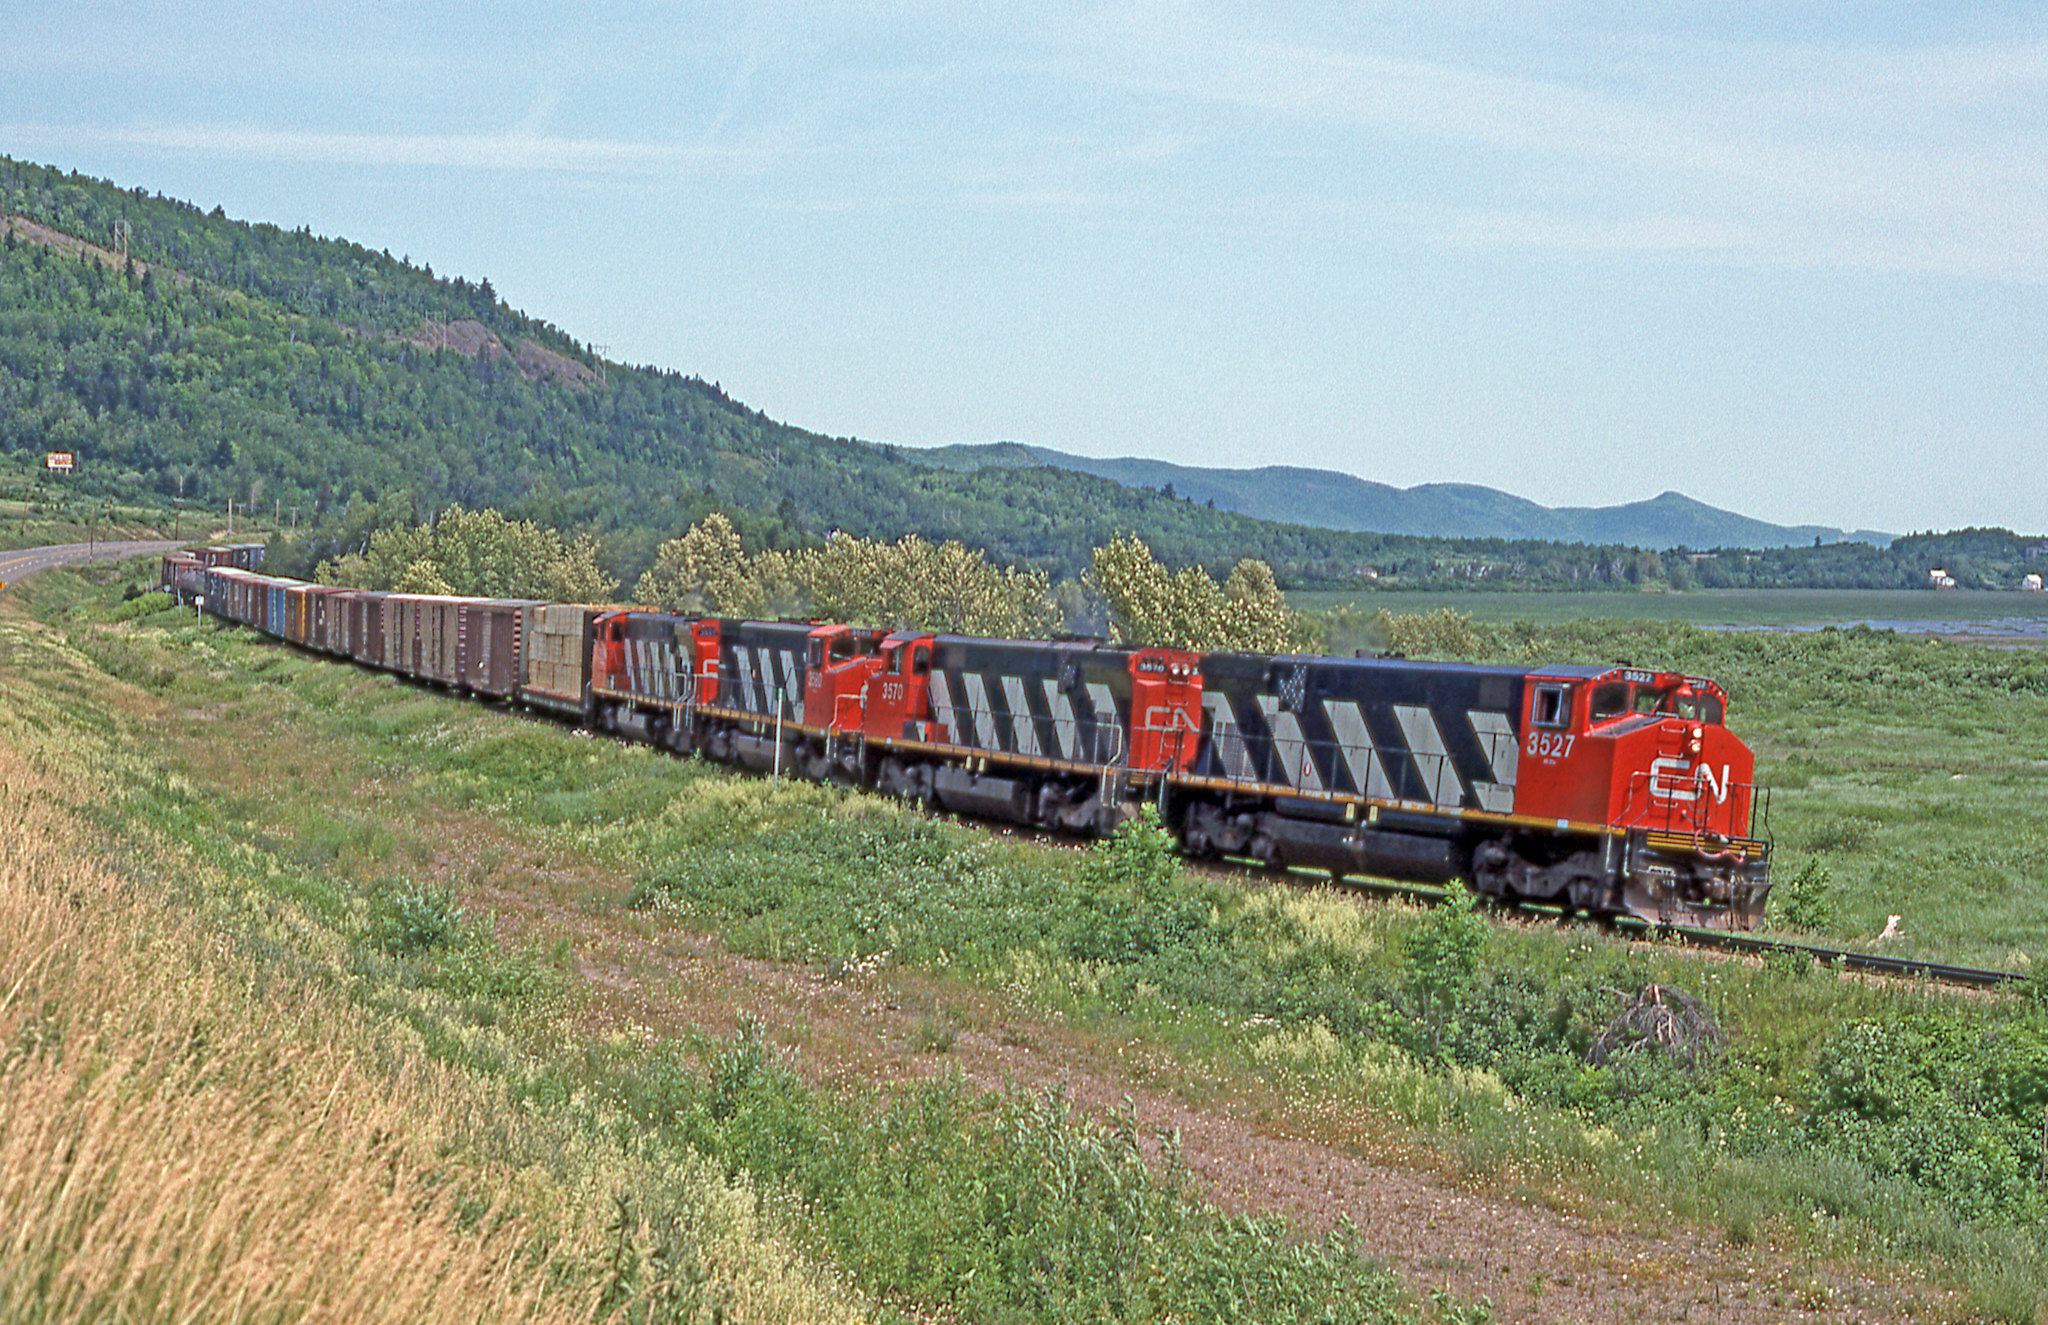 A heavy train off the Gaspé:
Canadian National train # 595 is closing in on Matapedia on a beautiful summer day in 1991. Apparently it's been a productive week along the Gaspé line given that four 3500s have been assigned for the run to Campbellton.  

Restigouche, Quebec
Saturday, July 6, 1991